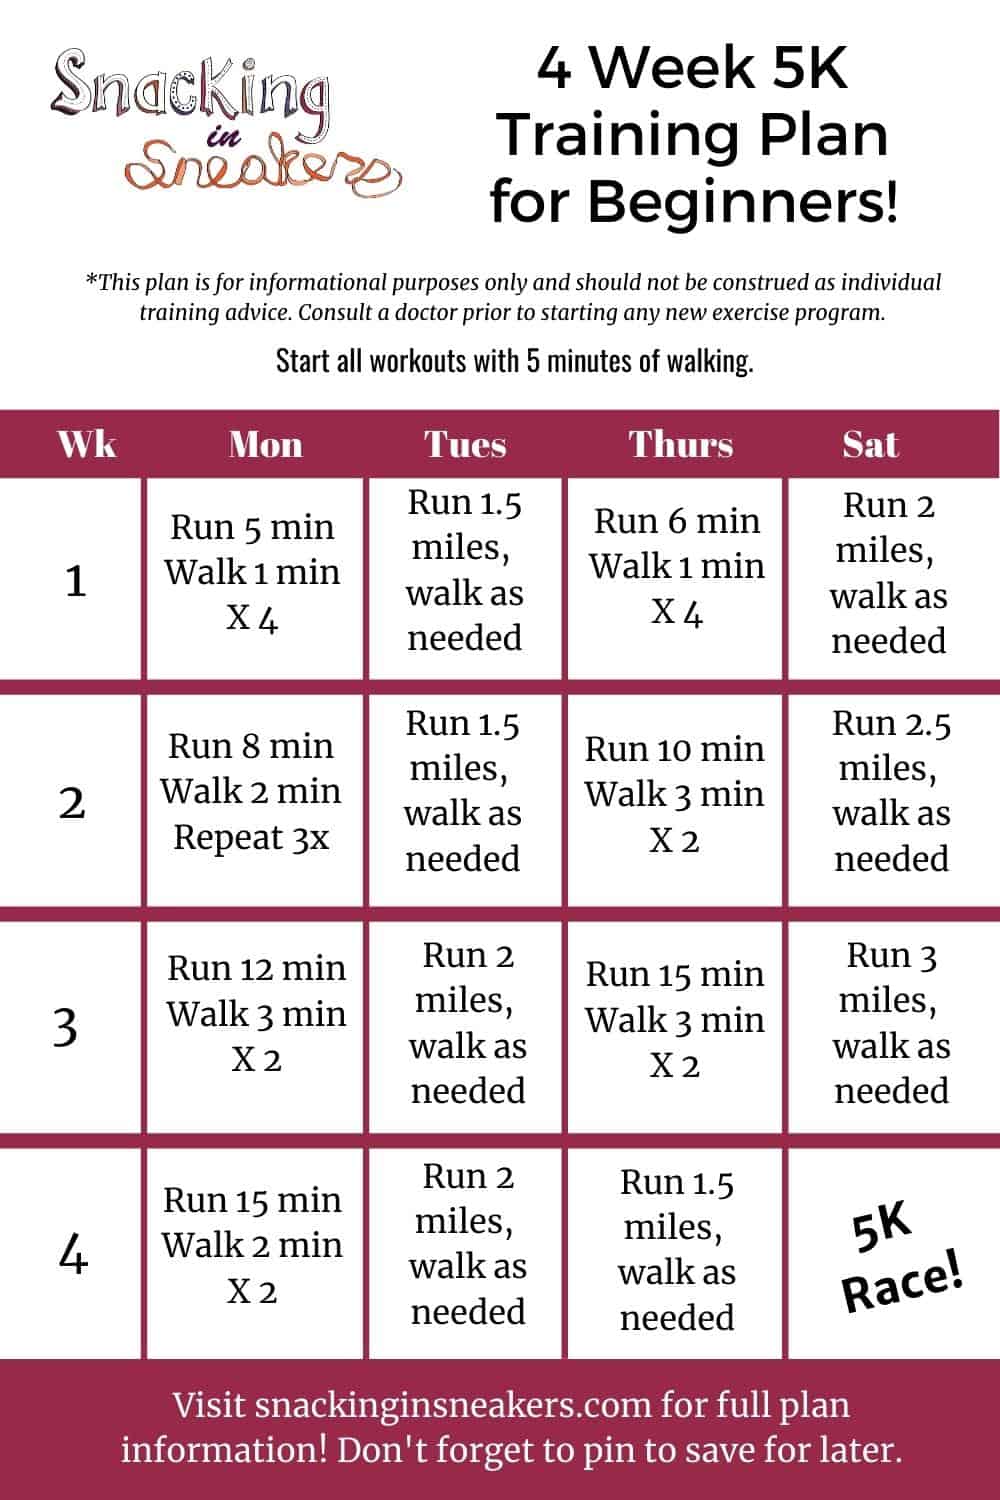 How long does it take to run 5k take if you're a beginner?